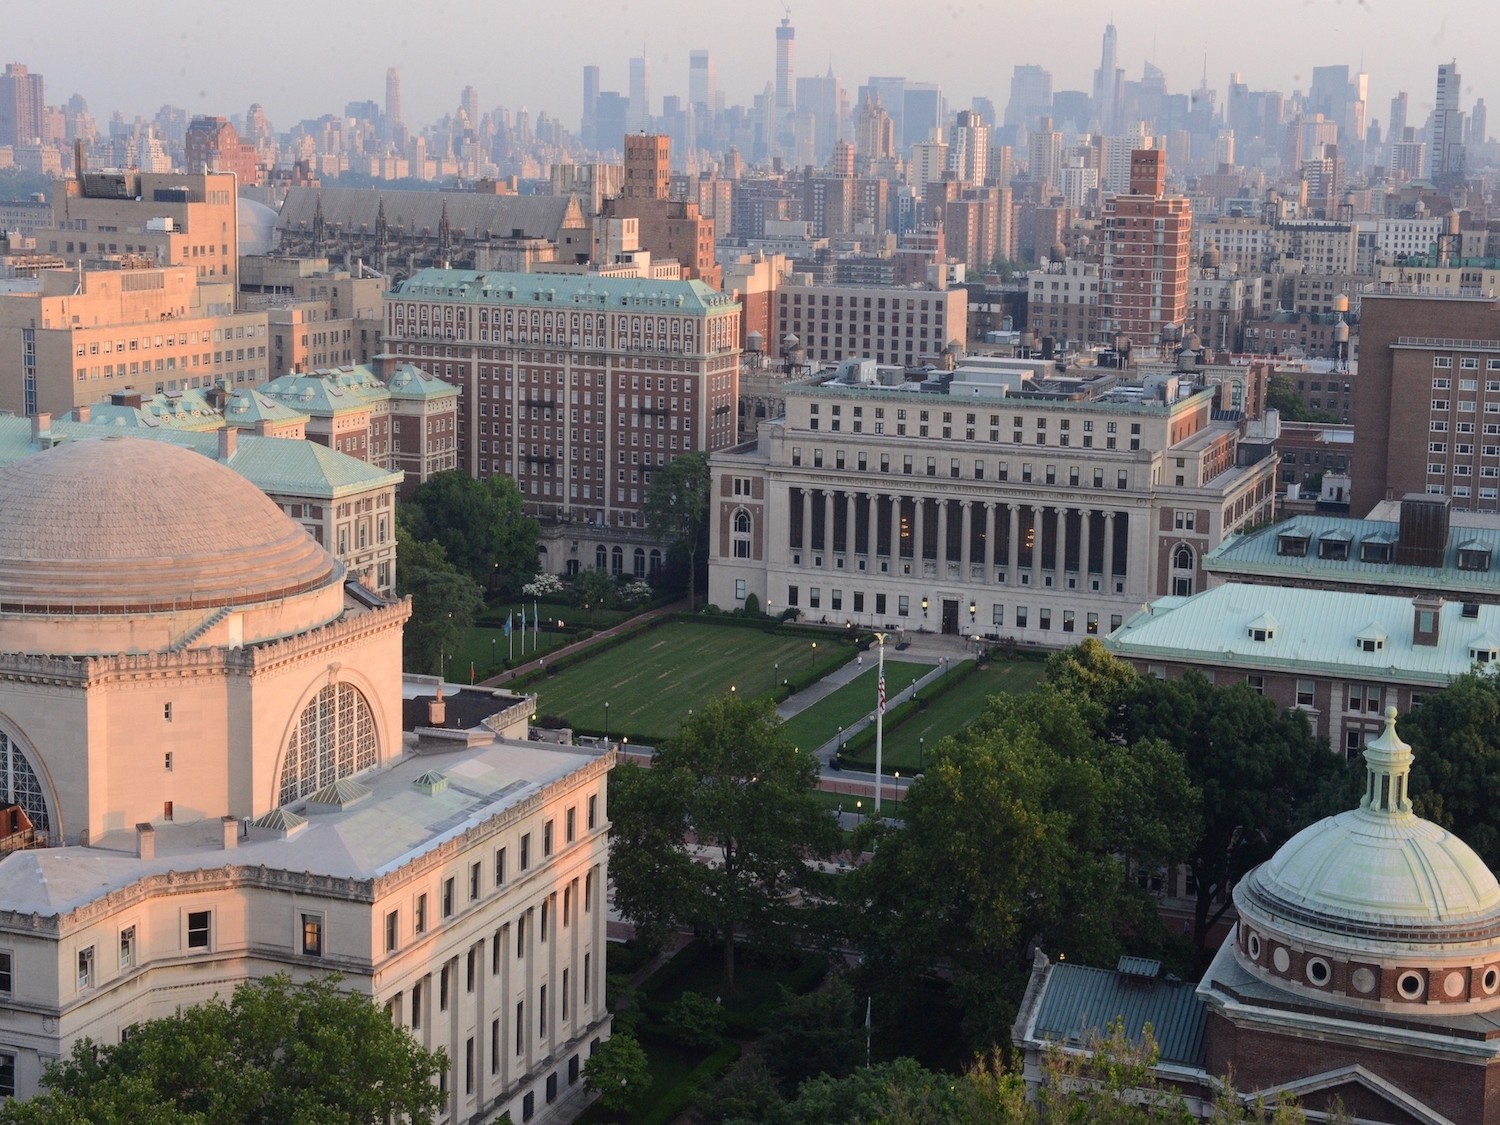 Image of view looking down upon Columbia University campus with NYC skyline in the background.